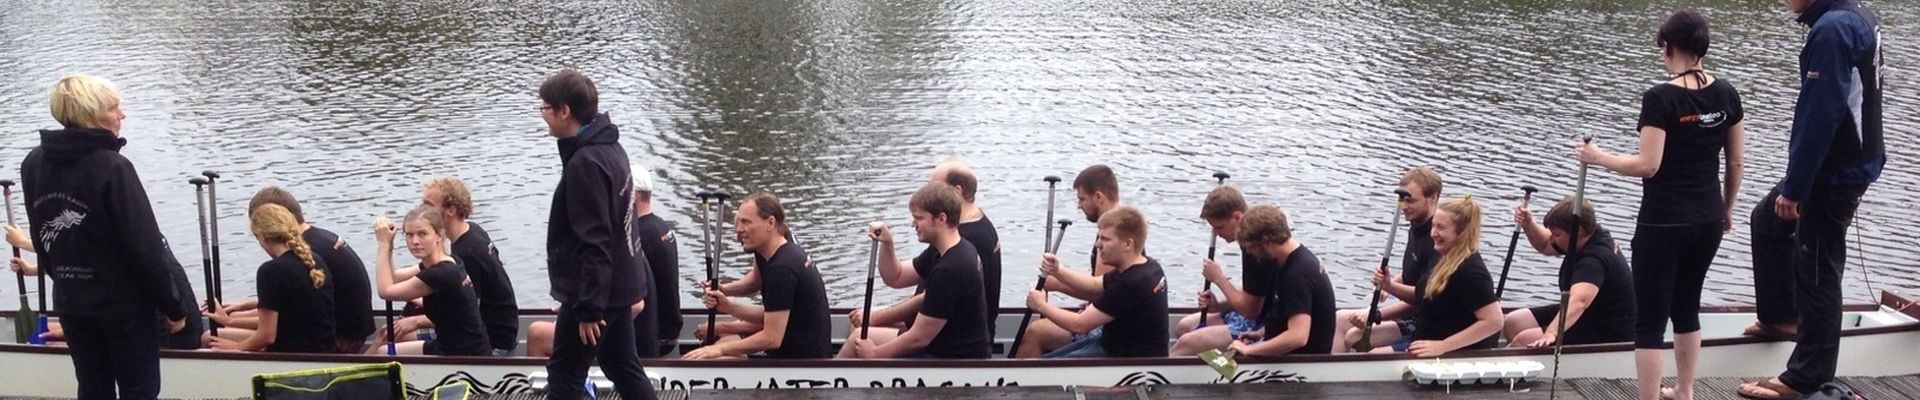 The energy & meteo systems team paddling a dragon boat.